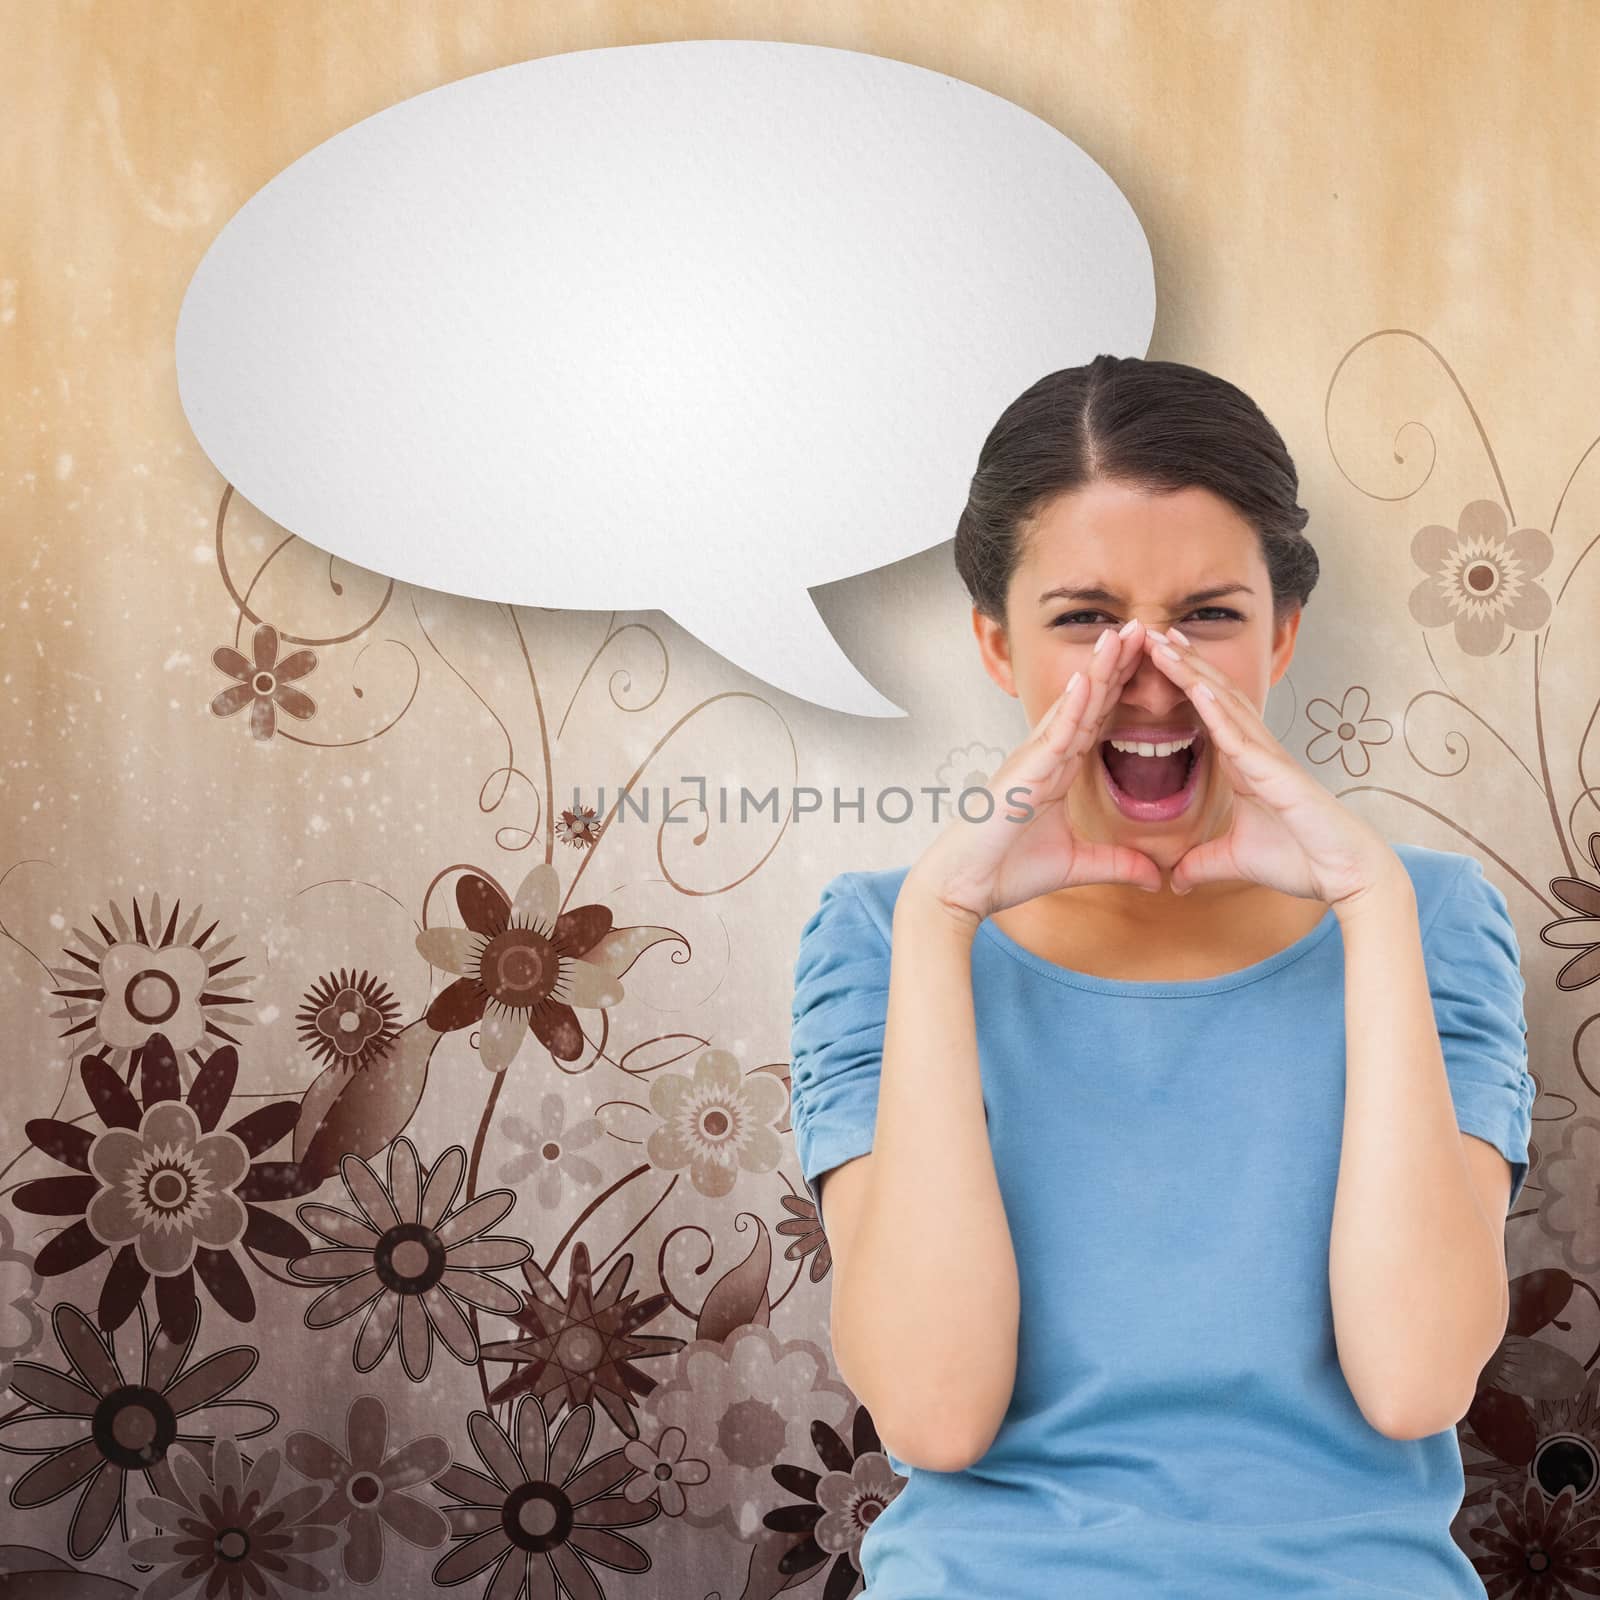 Pretty brunette shouting with speech bubble against digitally generated girly floral design